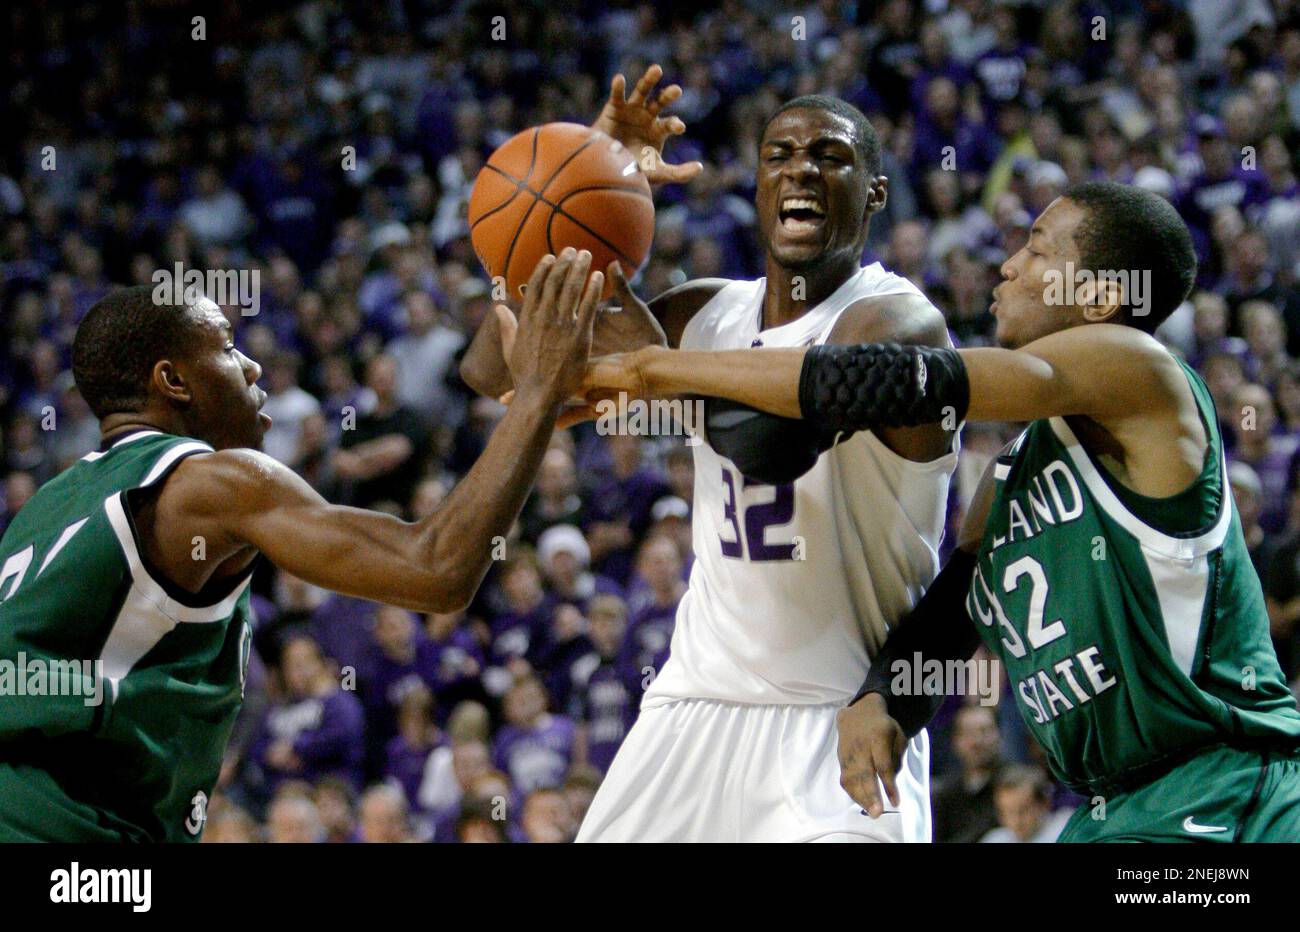 Kansas State's Jamar Samules, center, is pressured by Cleveland State's Norris  Cole, left, and D'aundray Brown, right, during the first half of an NCAA  college basketball game Tuesday, Dec. 29, 2009, in